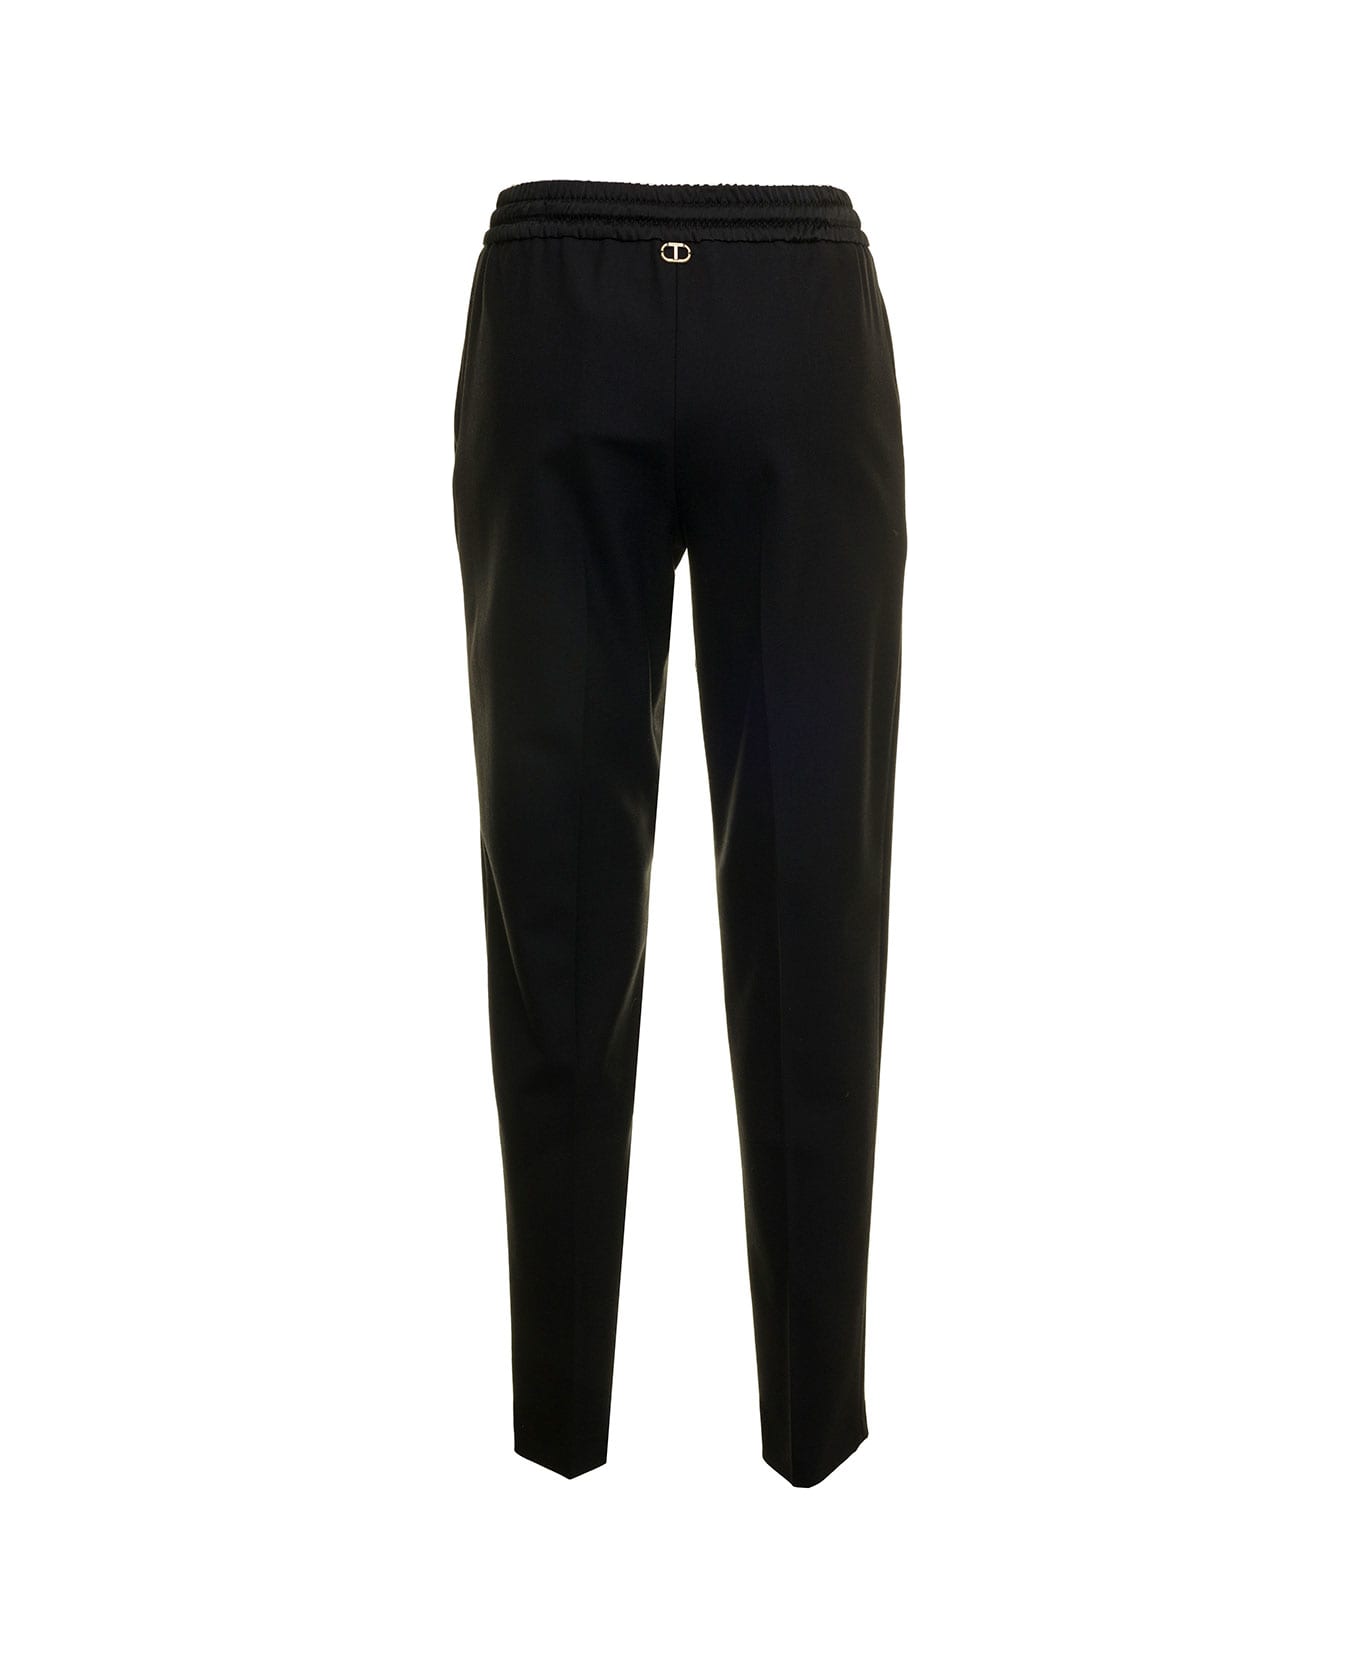 TwinSet Black Wool Trousers With Drawstring Twin Set Woman - Black